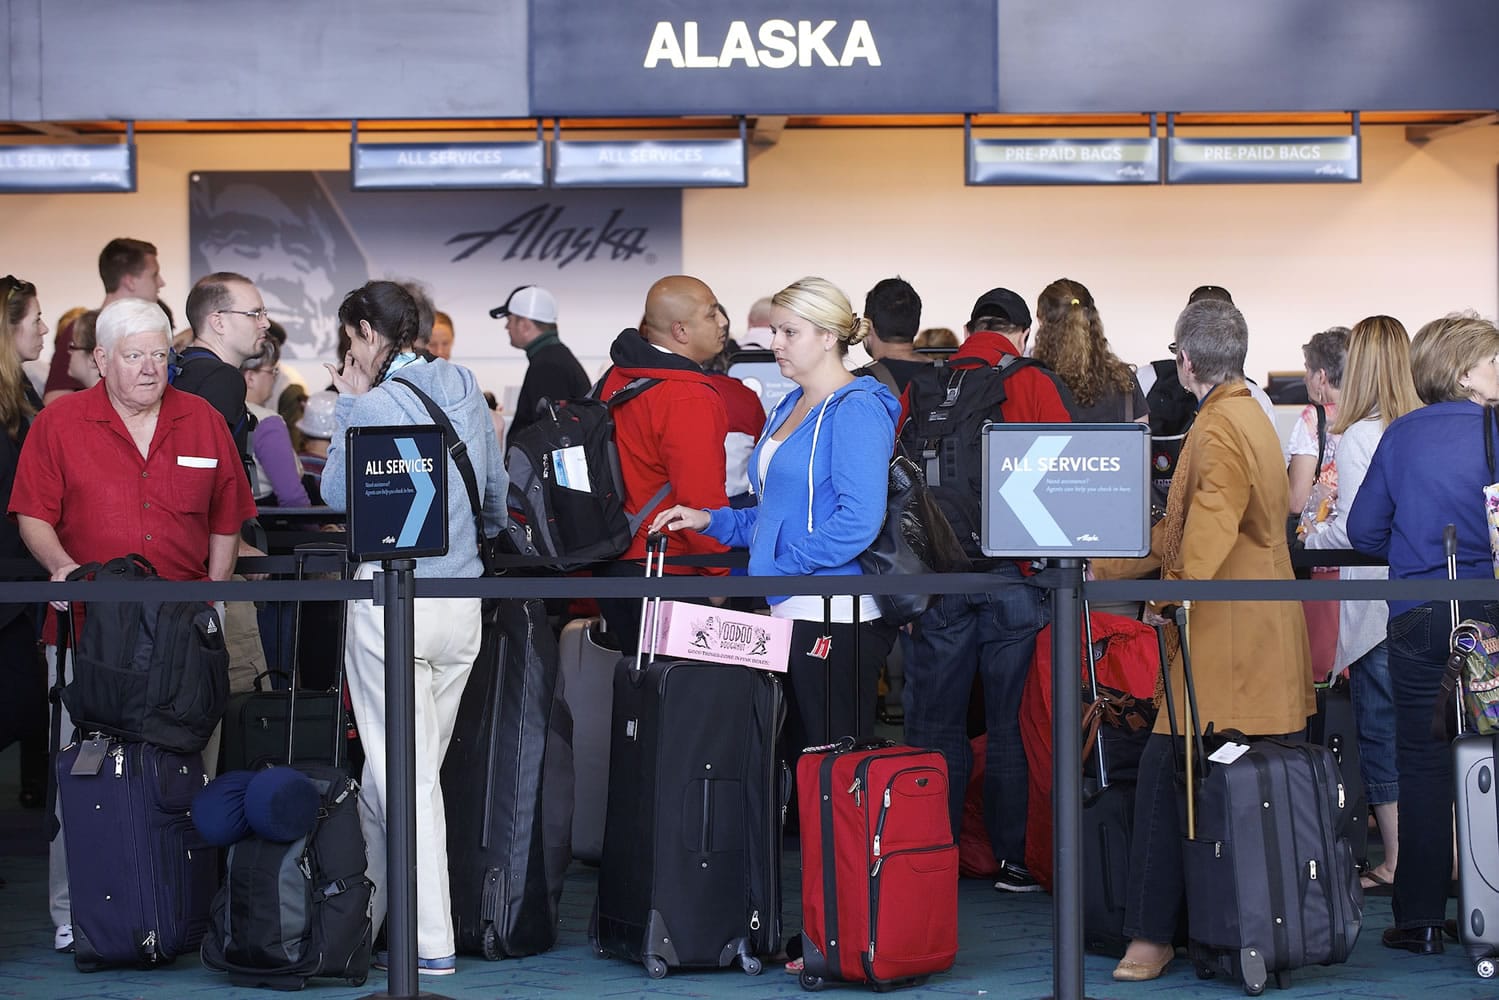 Commuters wait in long lines to check in at Alaska Airlines on Monday at Portland International Airport.